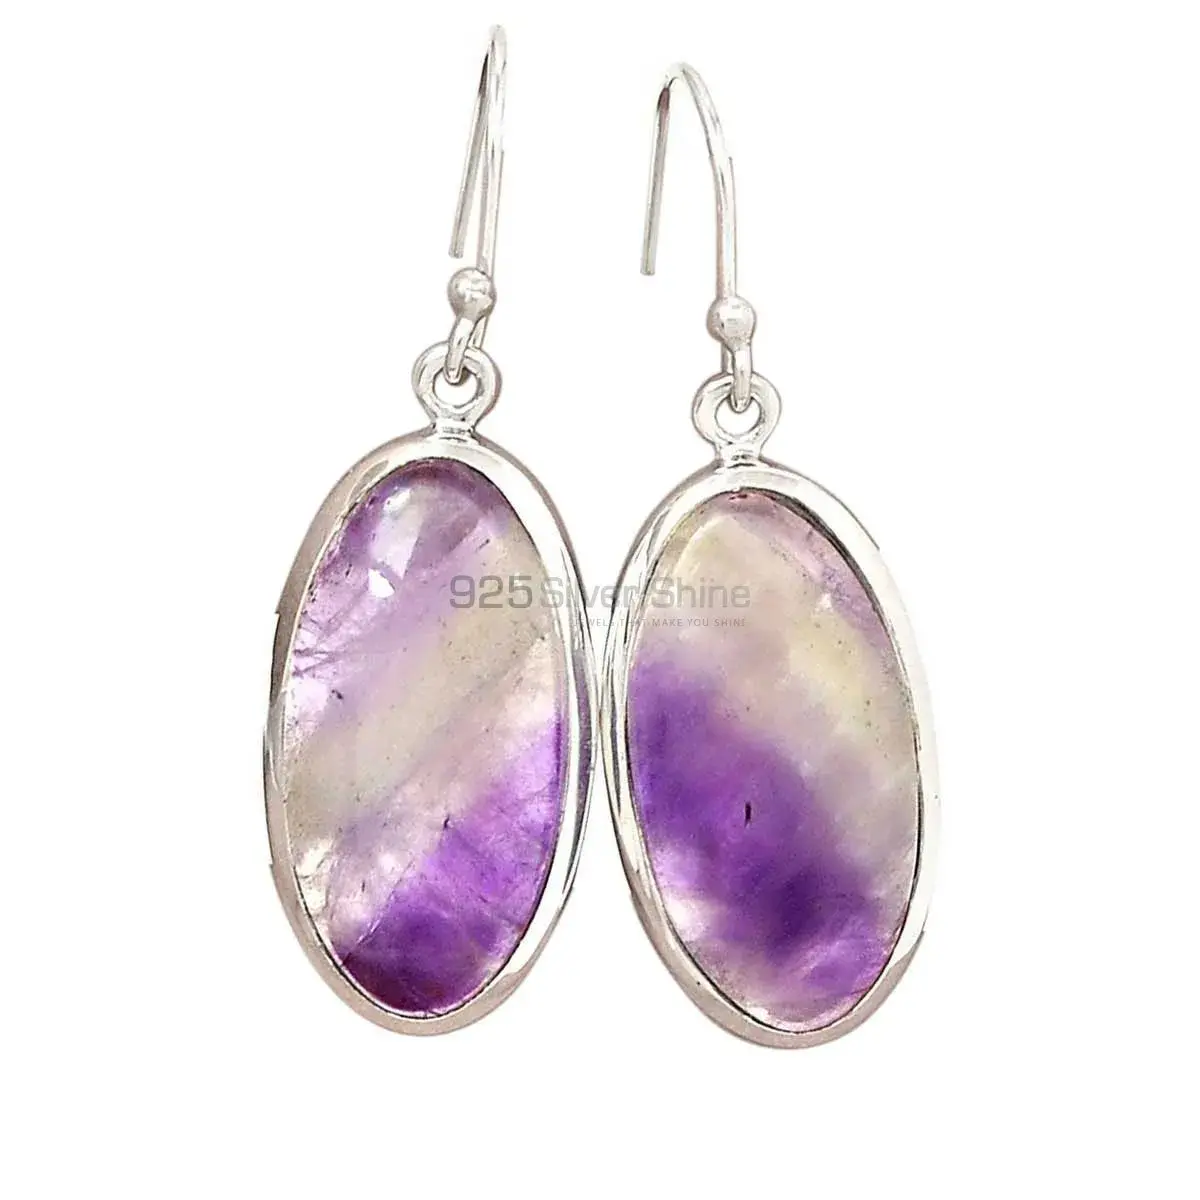 Inexpensive 925 Sterling Silver Earrings Wholesaler In Amethyst Lace agate Gemstone Jewelry 925SE2705_0